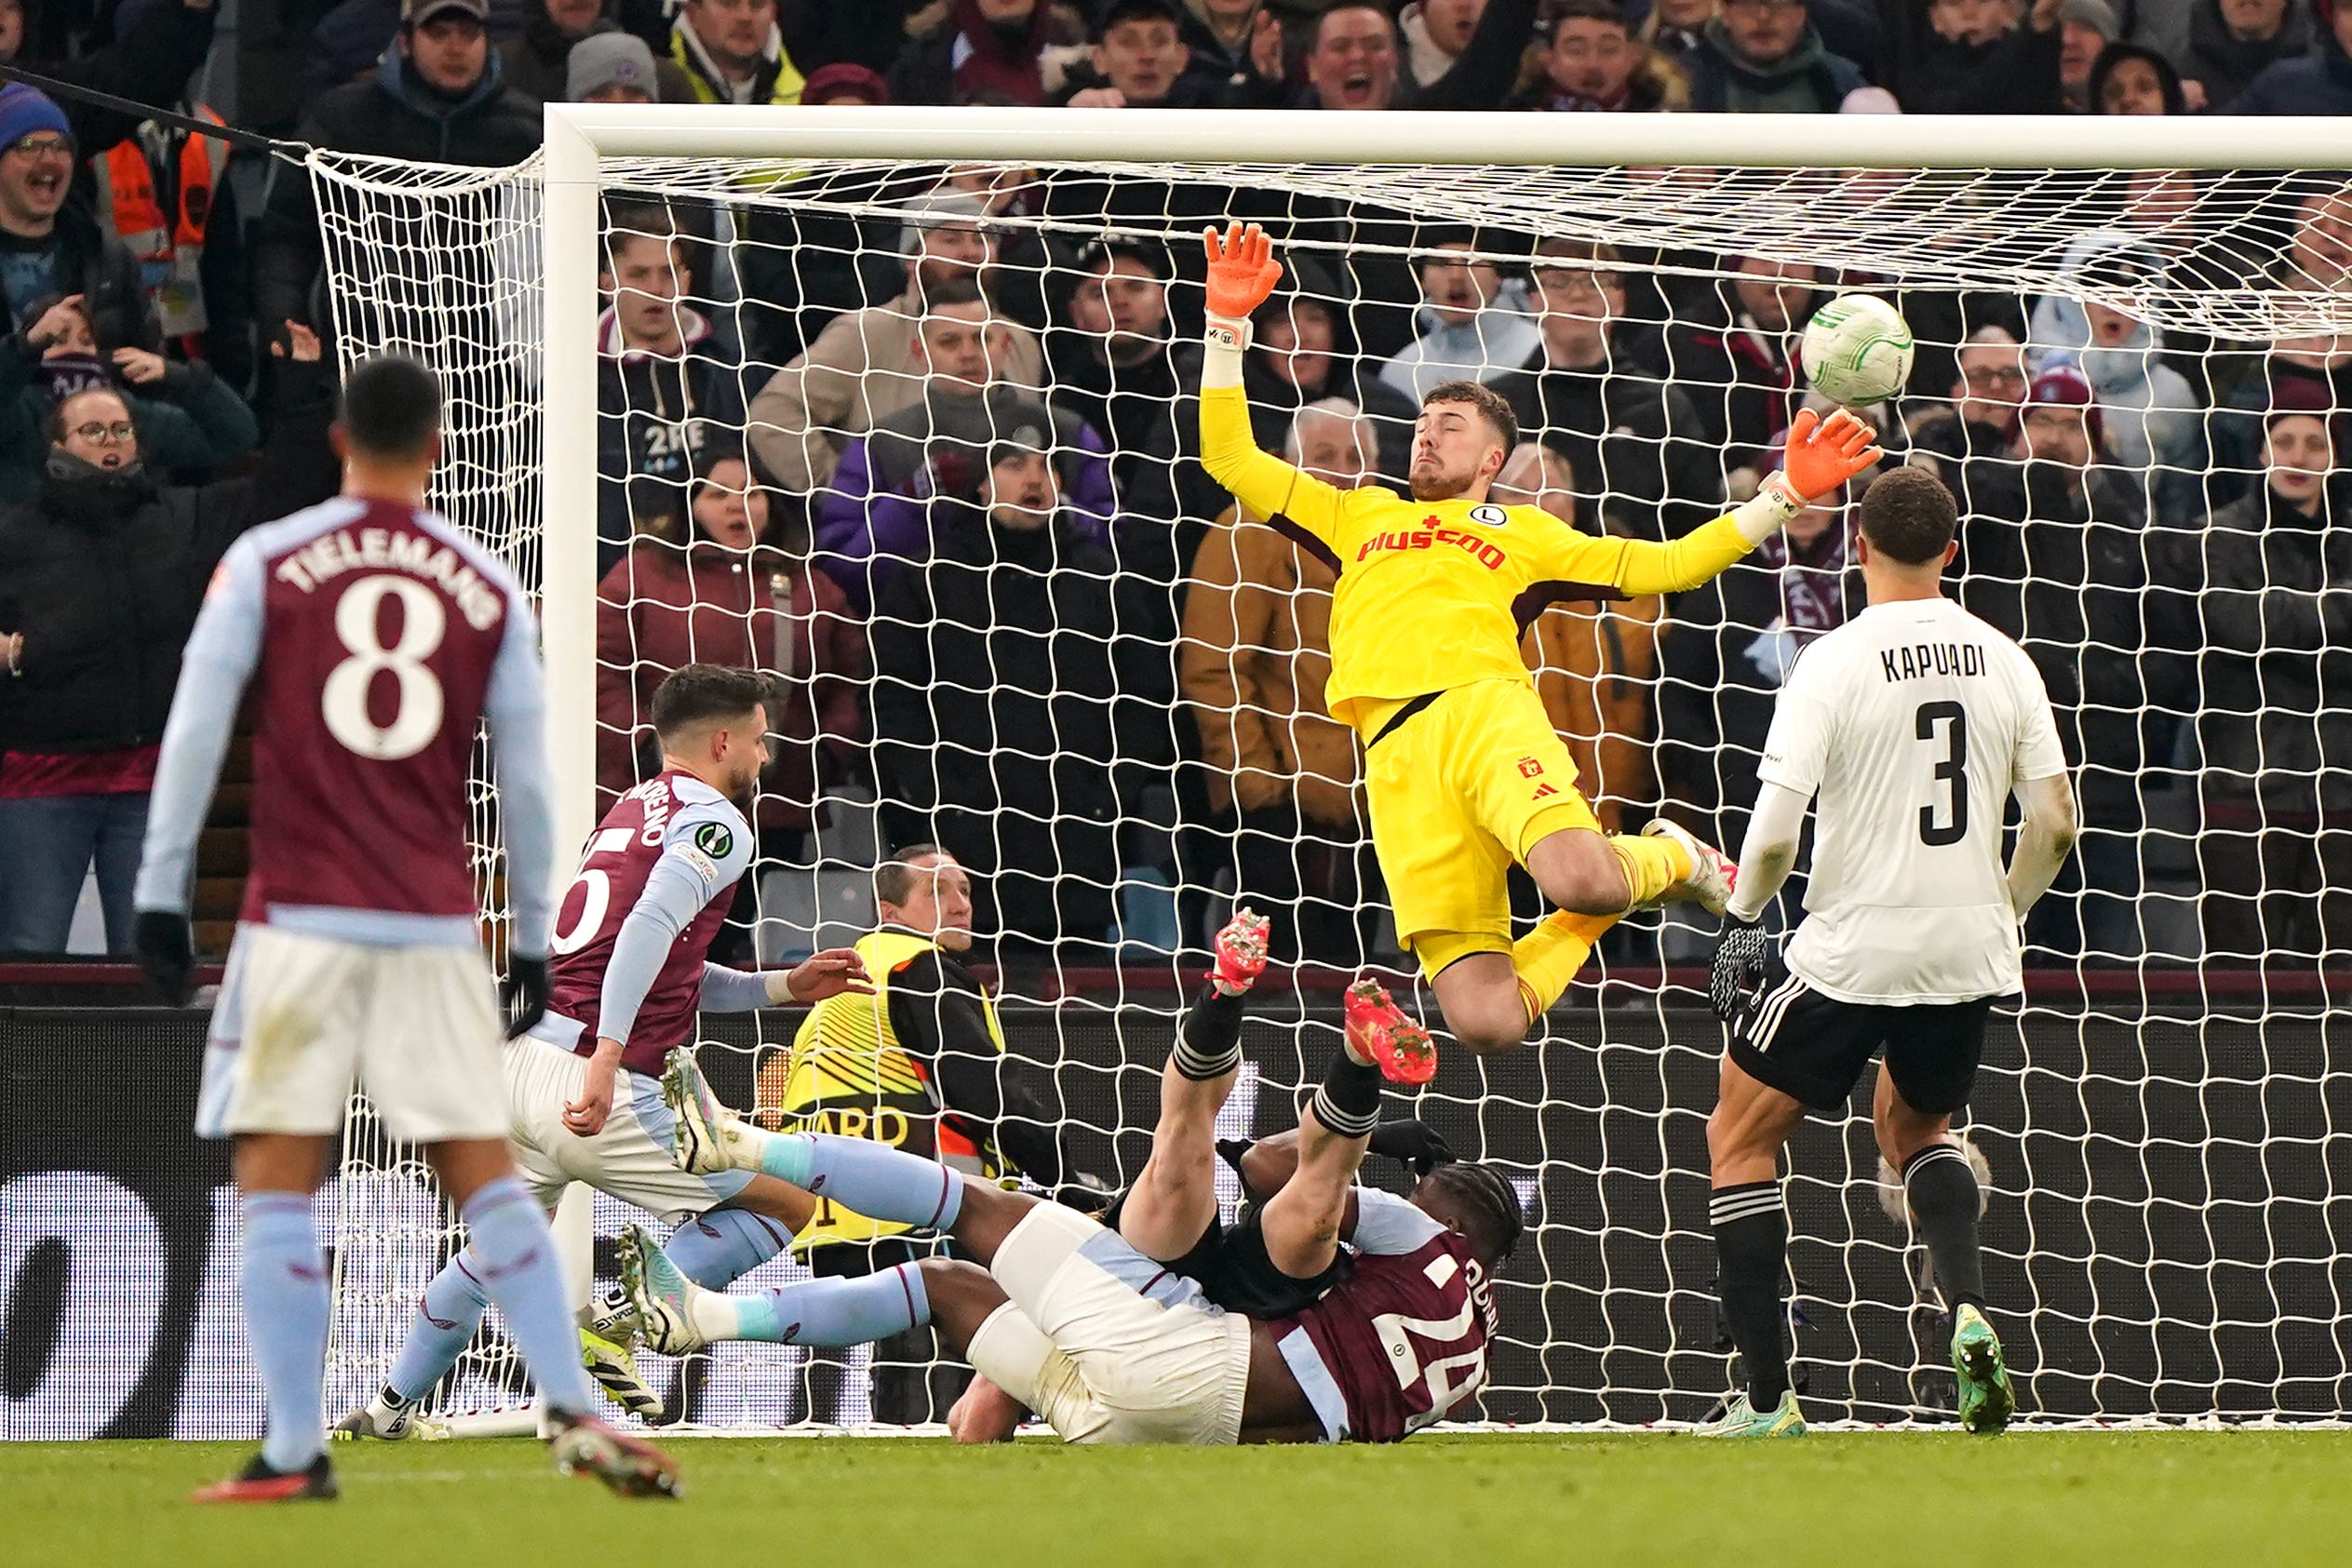 Aston Villa won in a match overshadowed by matters outside the stadium